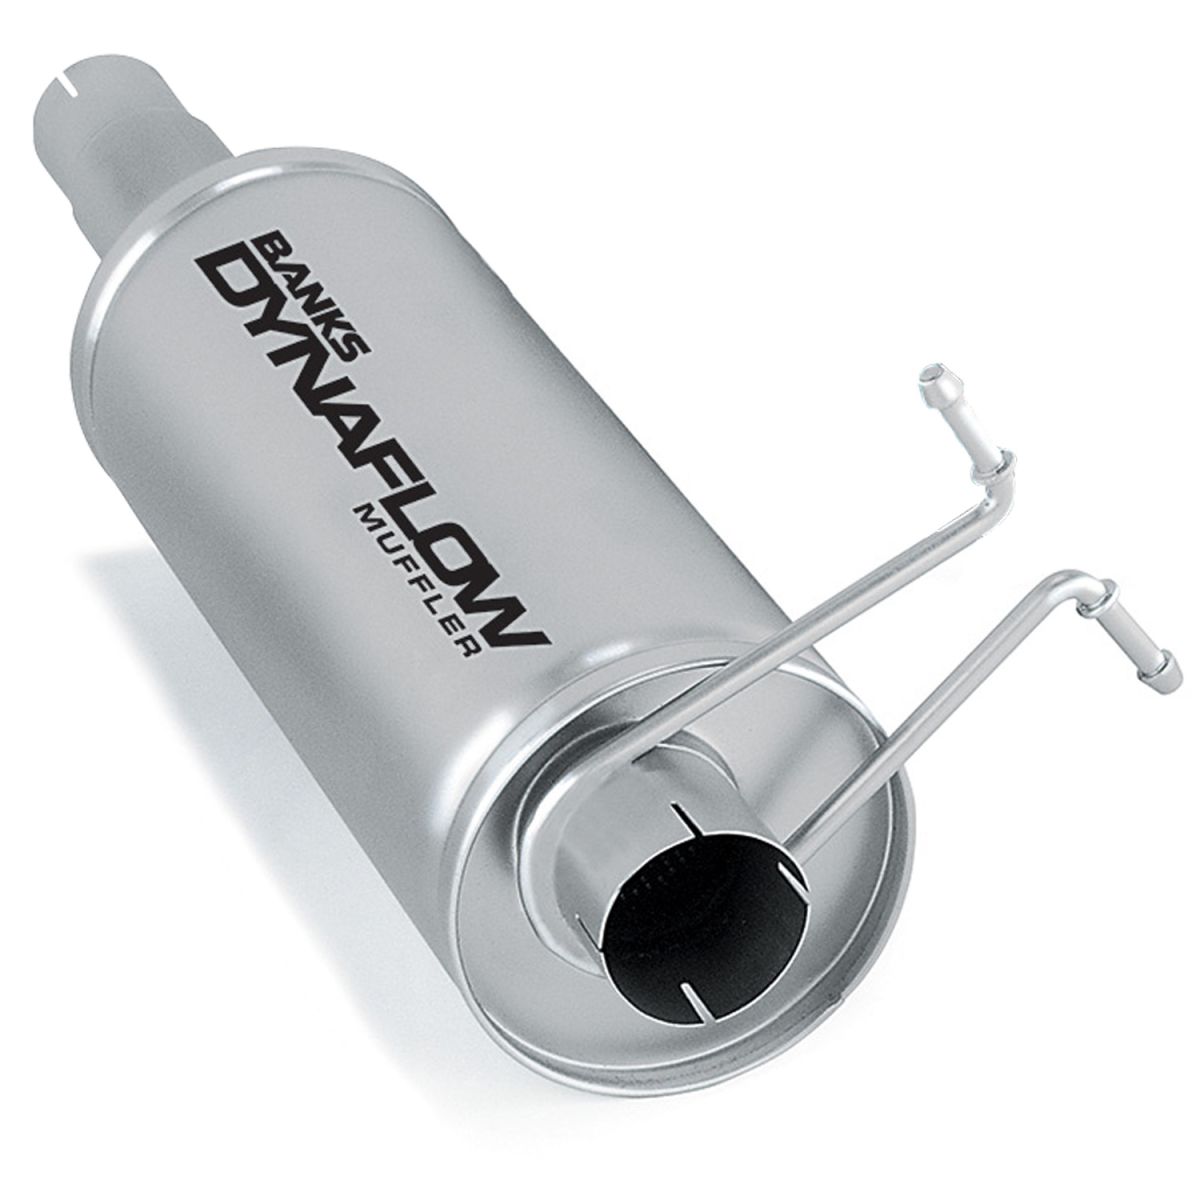 Banks Power - Banks Power Stainless Steel Exhaust Muffler 3.5 Inch Inlet and Outlet 99-04 Ford 6.8L Excursion